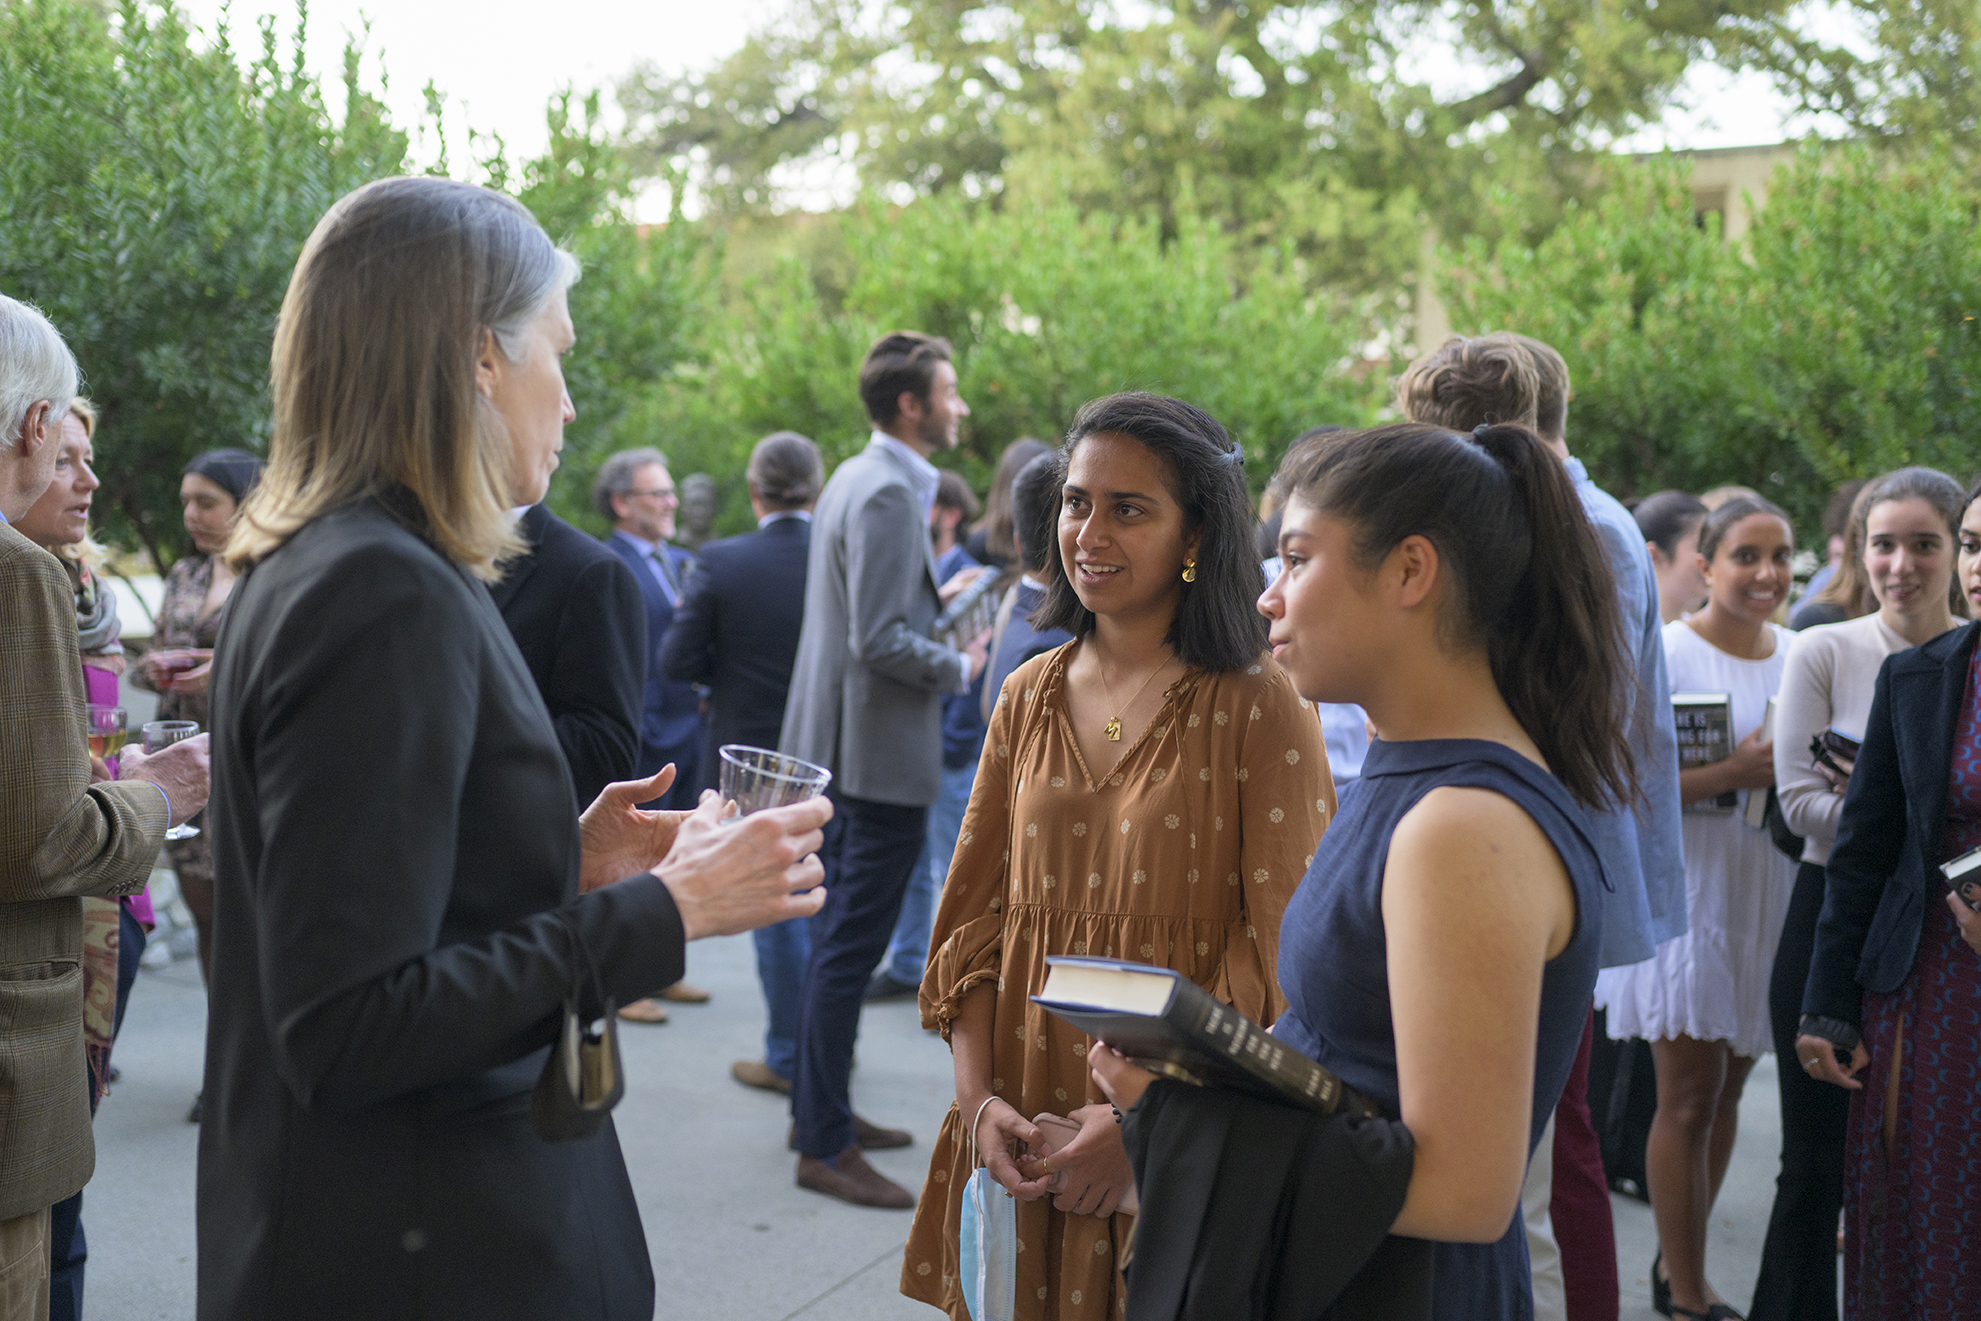 Fiona Hill speaks to two students on the Ath patio. Behind them, a line of students hold copies of her book and faculty mingle with other attendees.